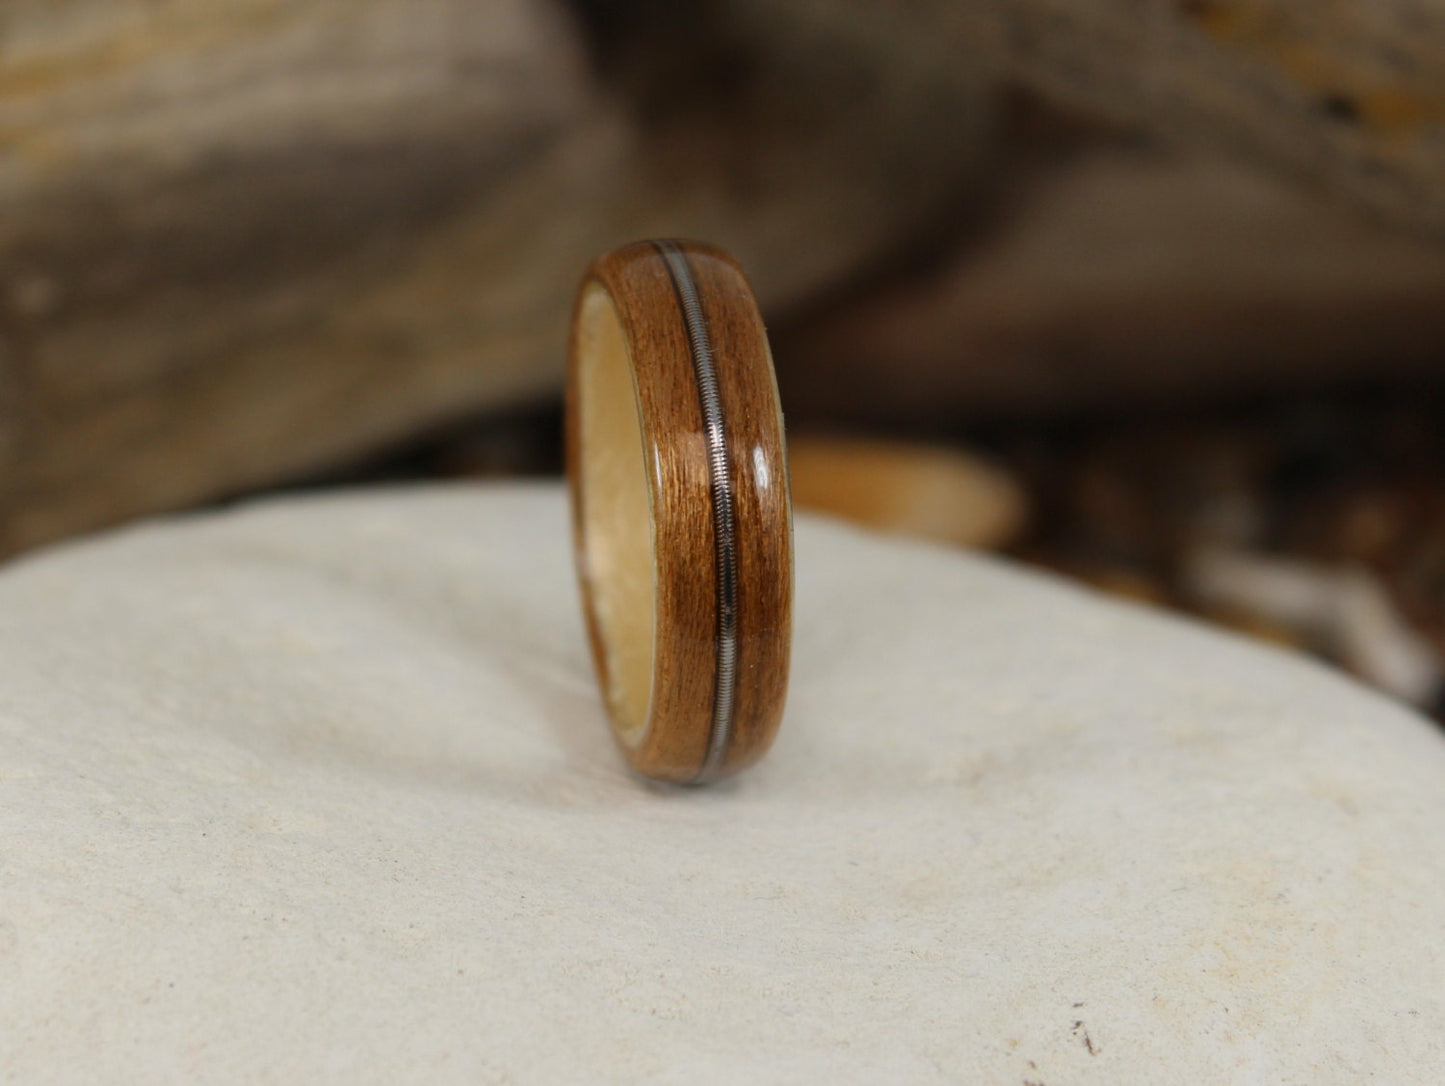 Cherry and Sycamore Bent Wood Ring with a Guitar String Inlay